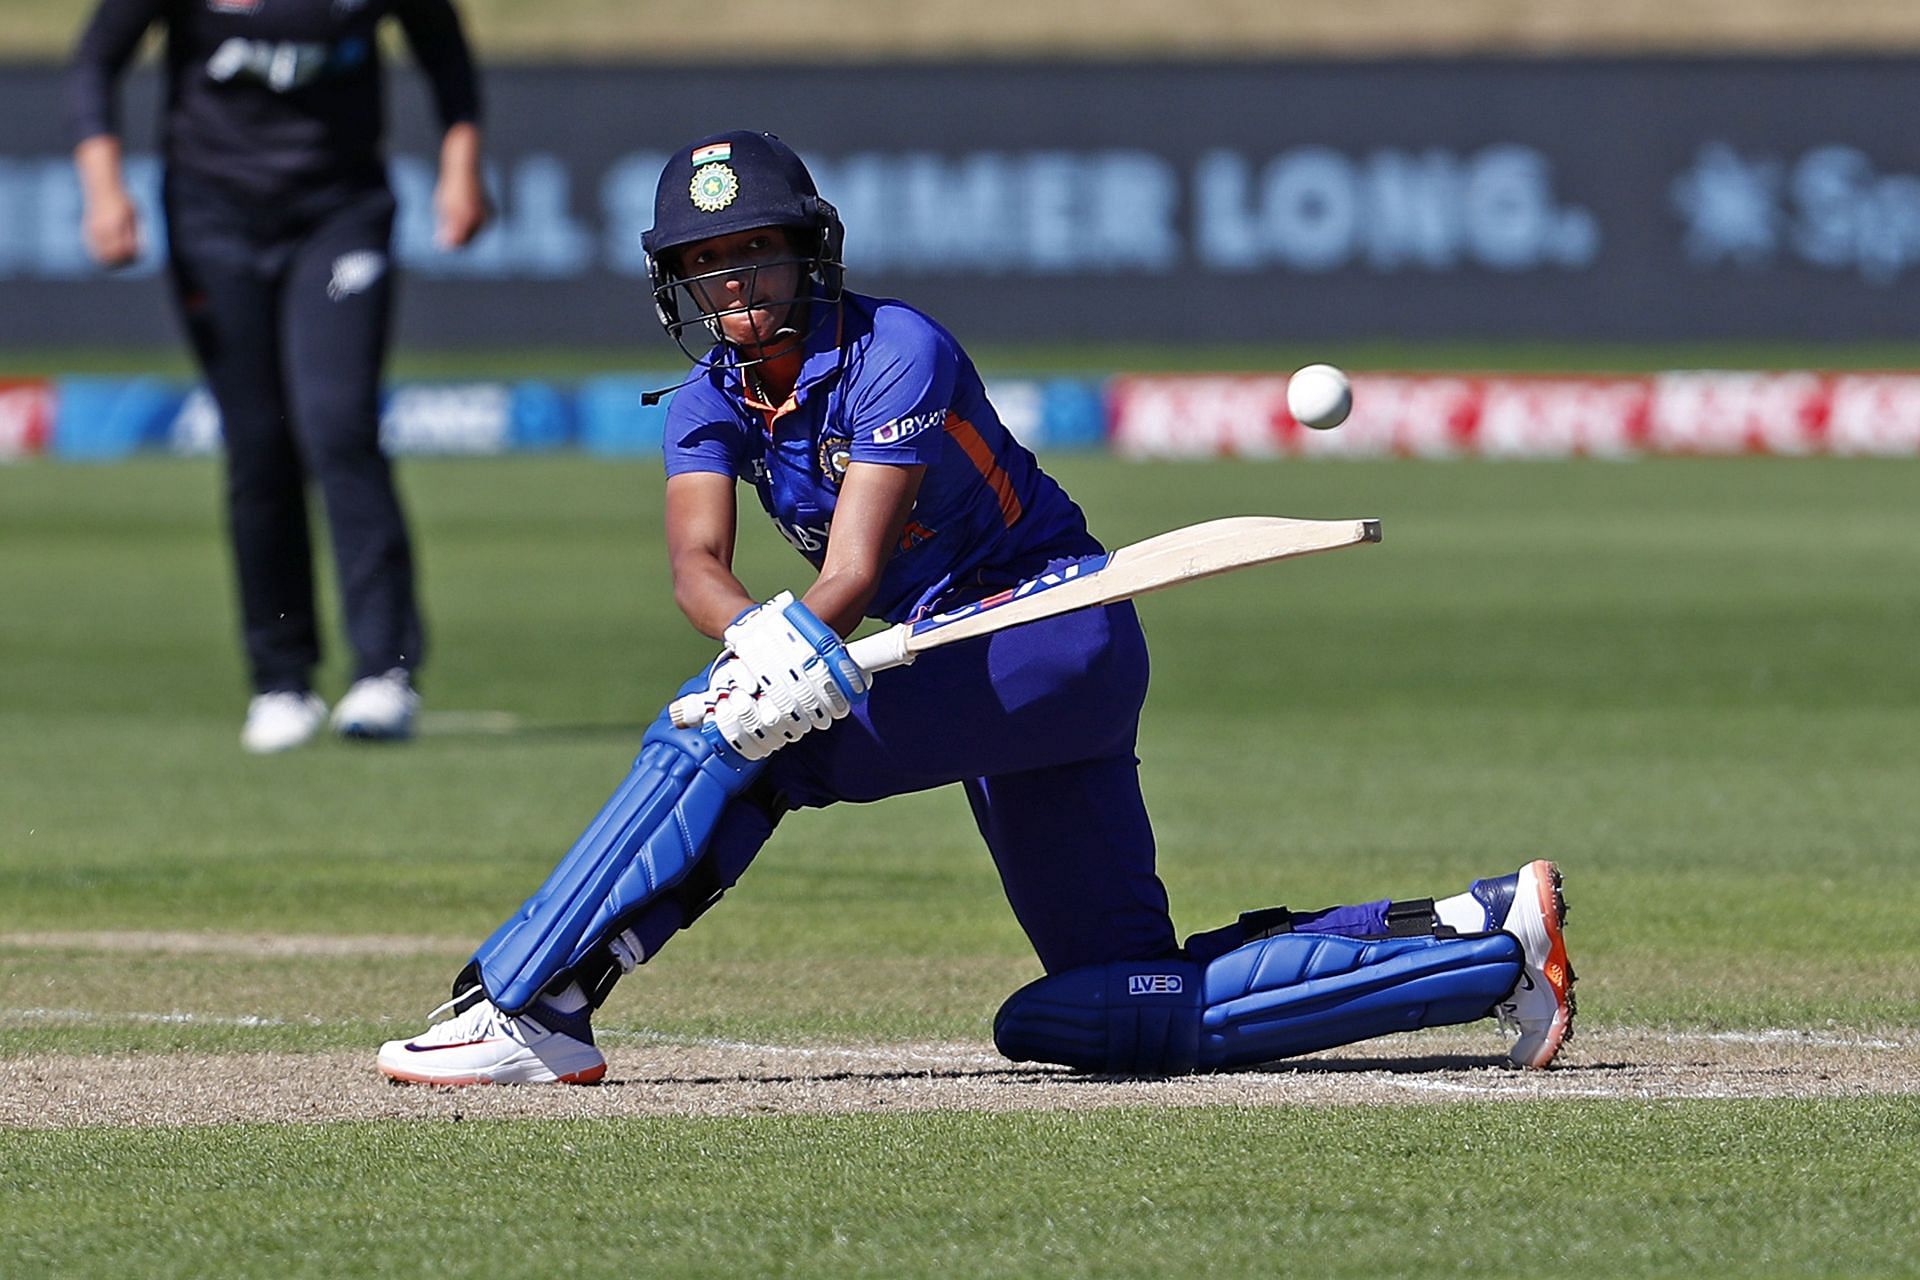 Harmanpreet Kaur top-scored for the Supernovas in the first game (Image courtesy: BCCI)